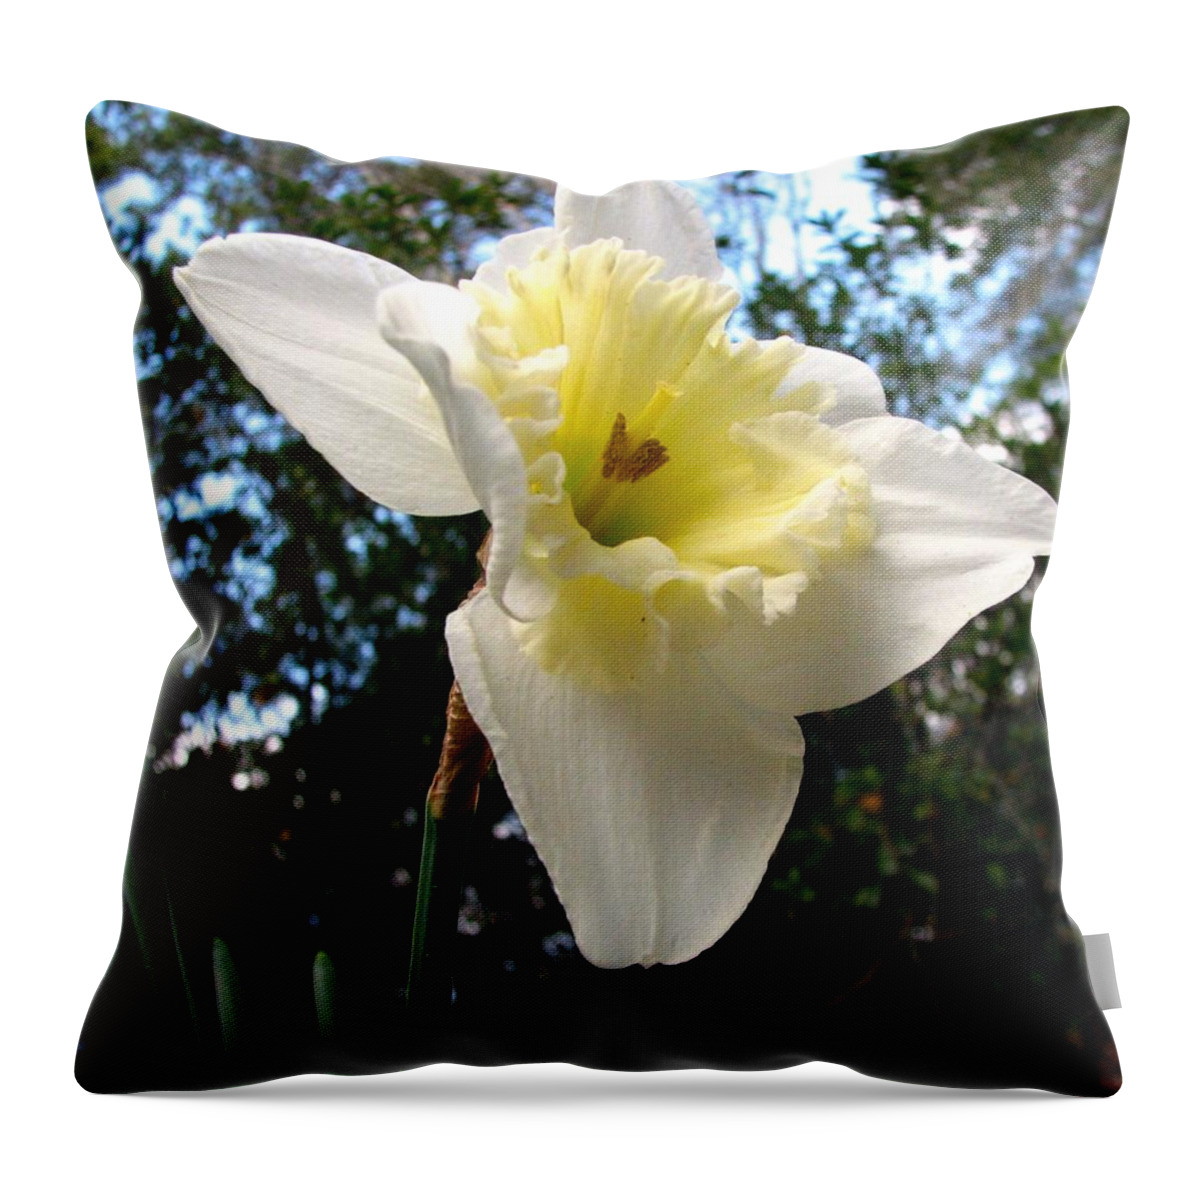 Daffodil Throw Pillow featuring the photograph Spring's First Daffodil 3 by J M Farris Photography